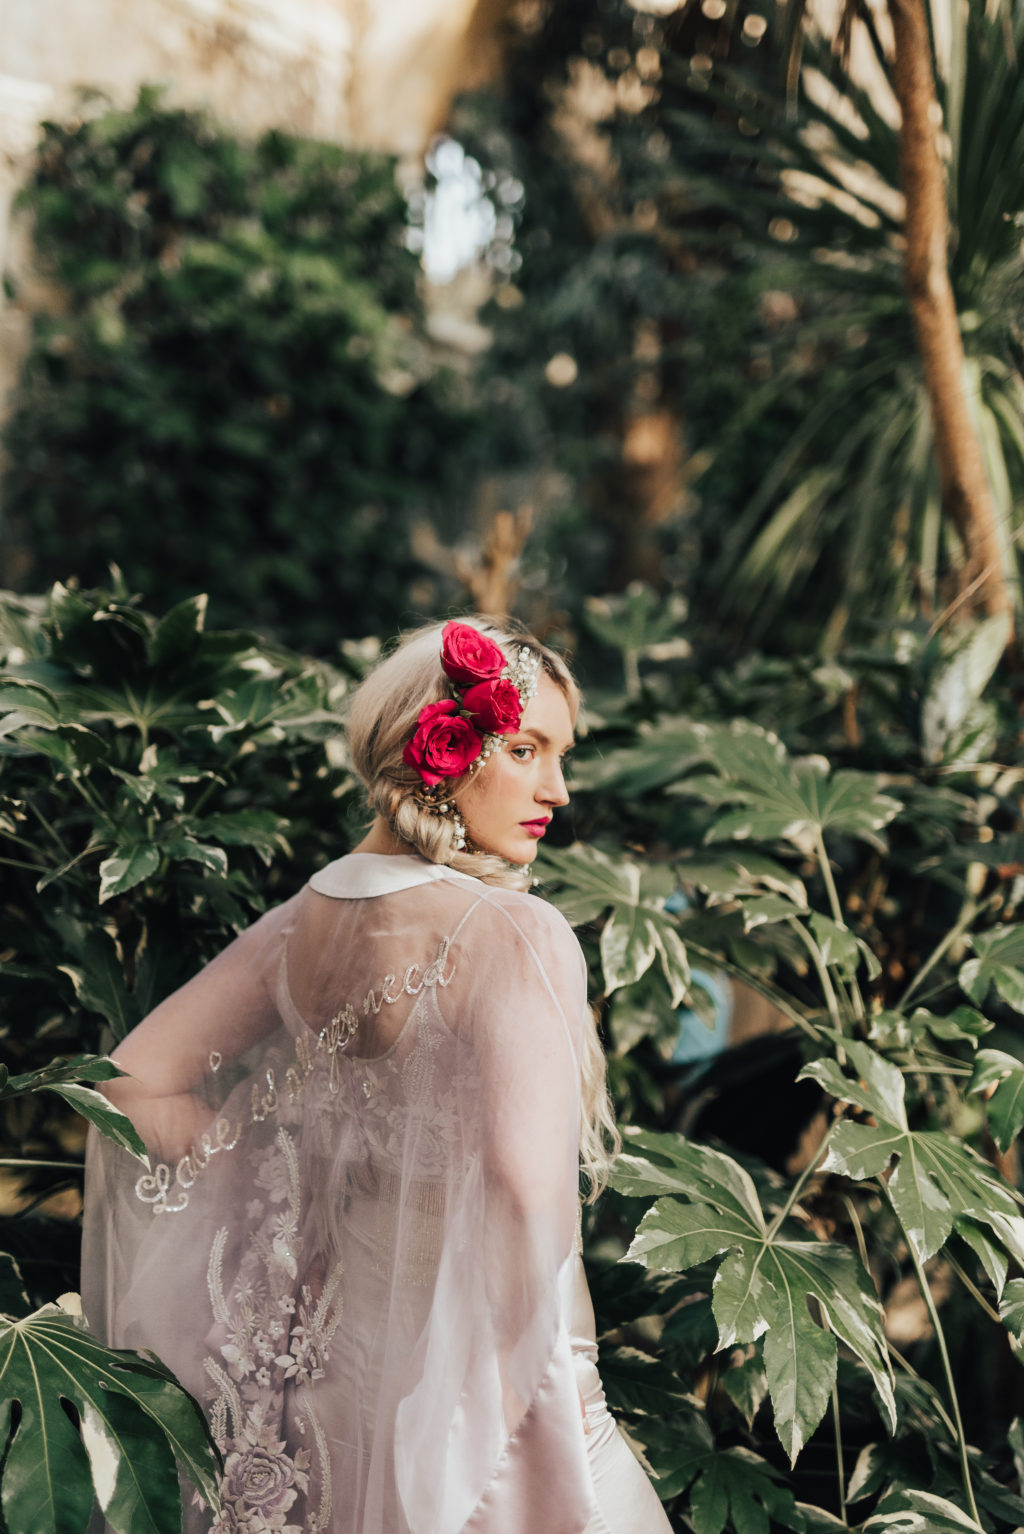 Ethical Bridalwear by Bowen Dryden: The 'Rebel Rose' Collection